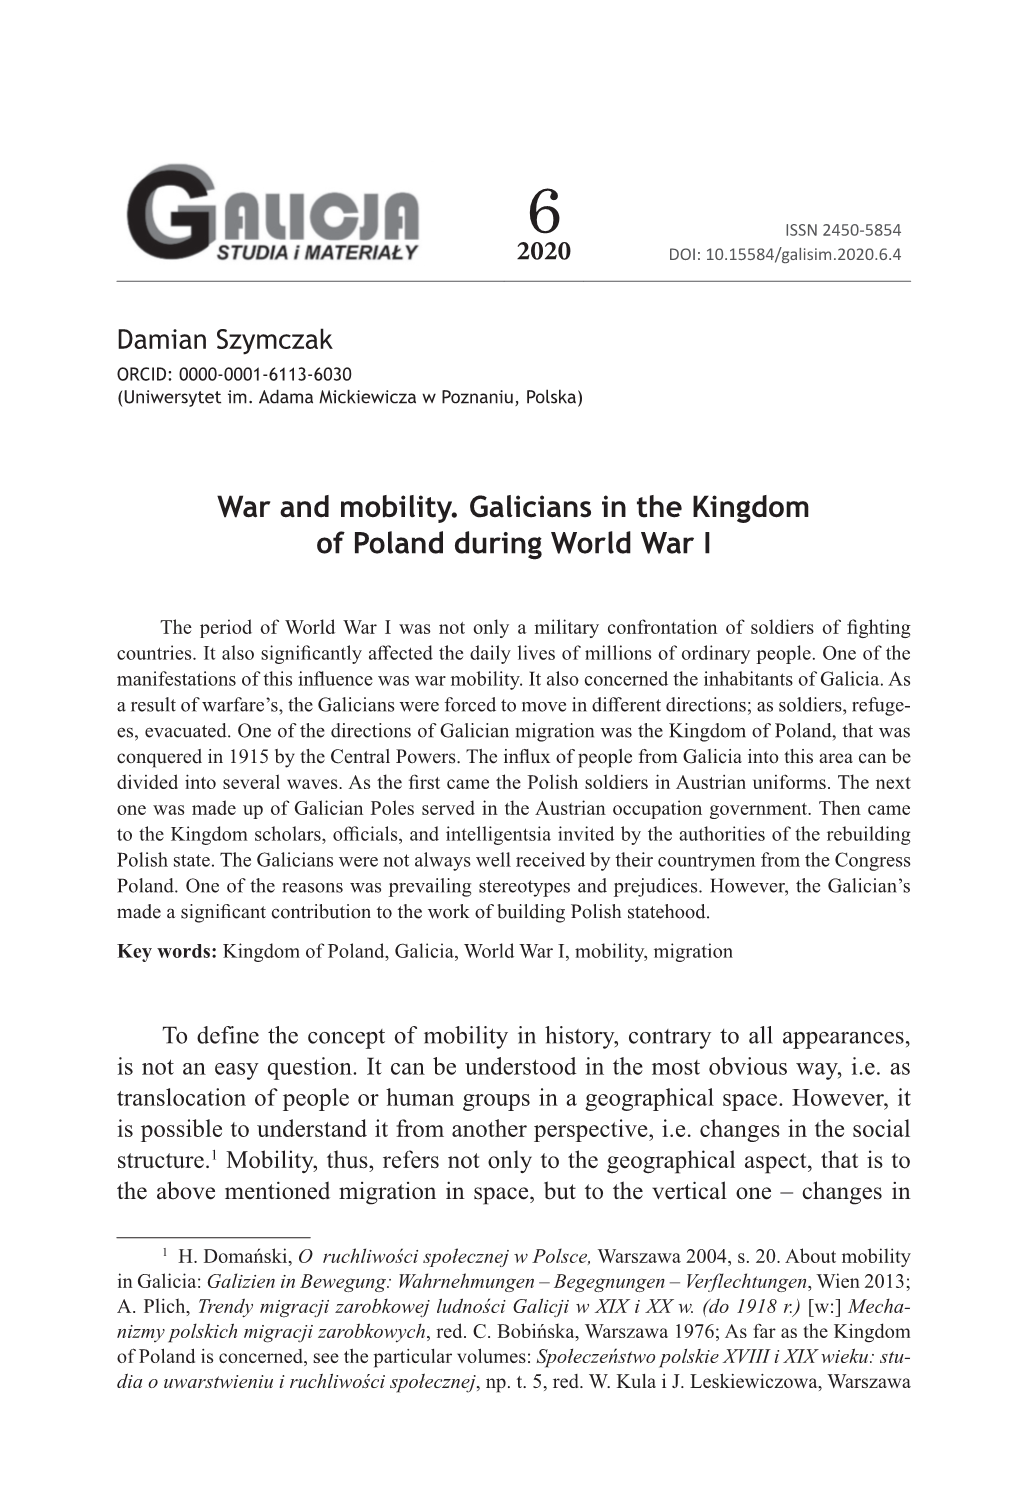 War and Mobility. Galicians in the Kingdom of Poland During World War I